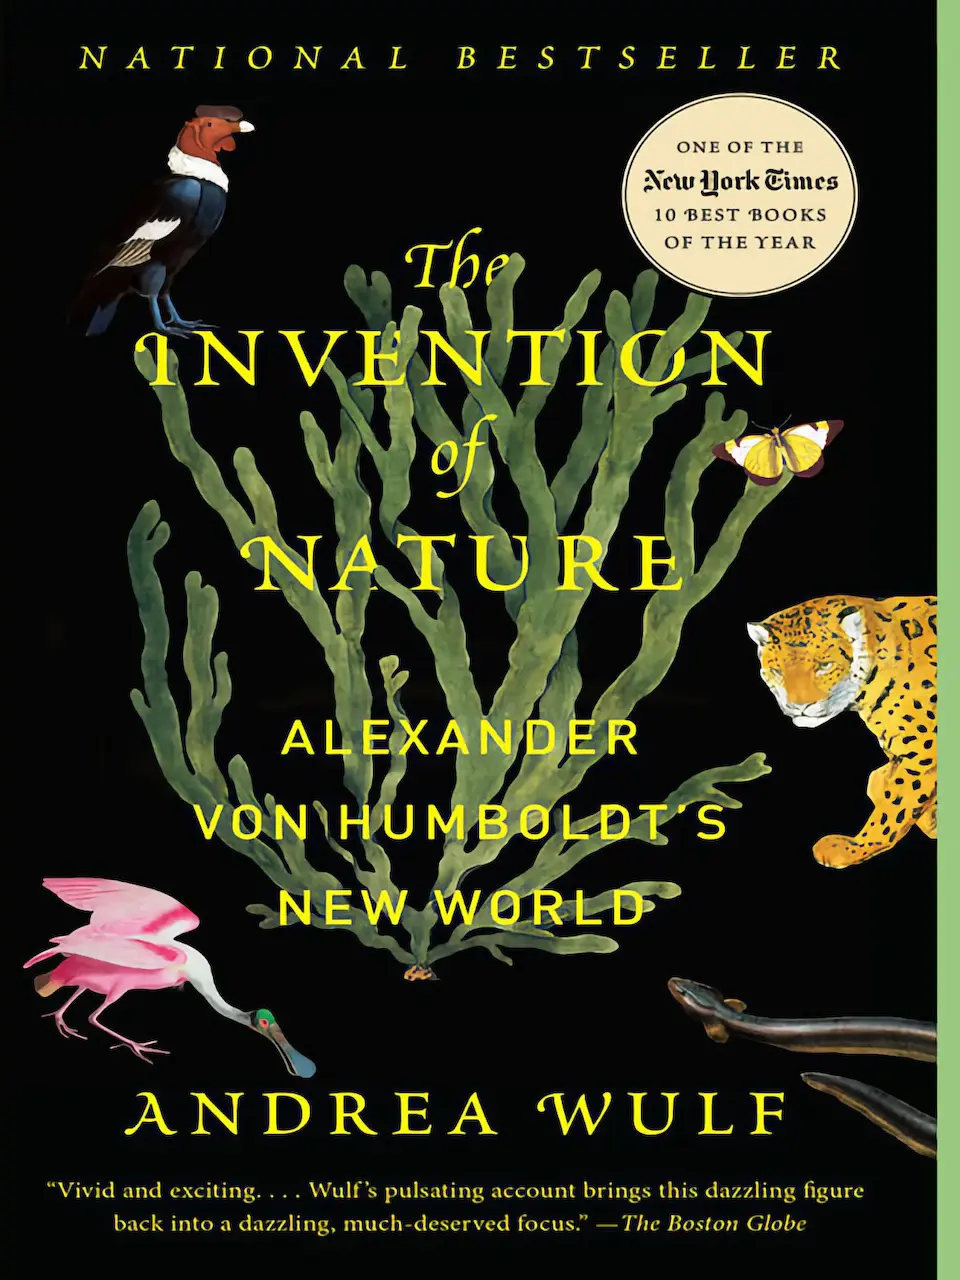 The Invention of Nature: Alexander Von Humboldt's New World by Andrea Wulf finished on 2022 Aug 24